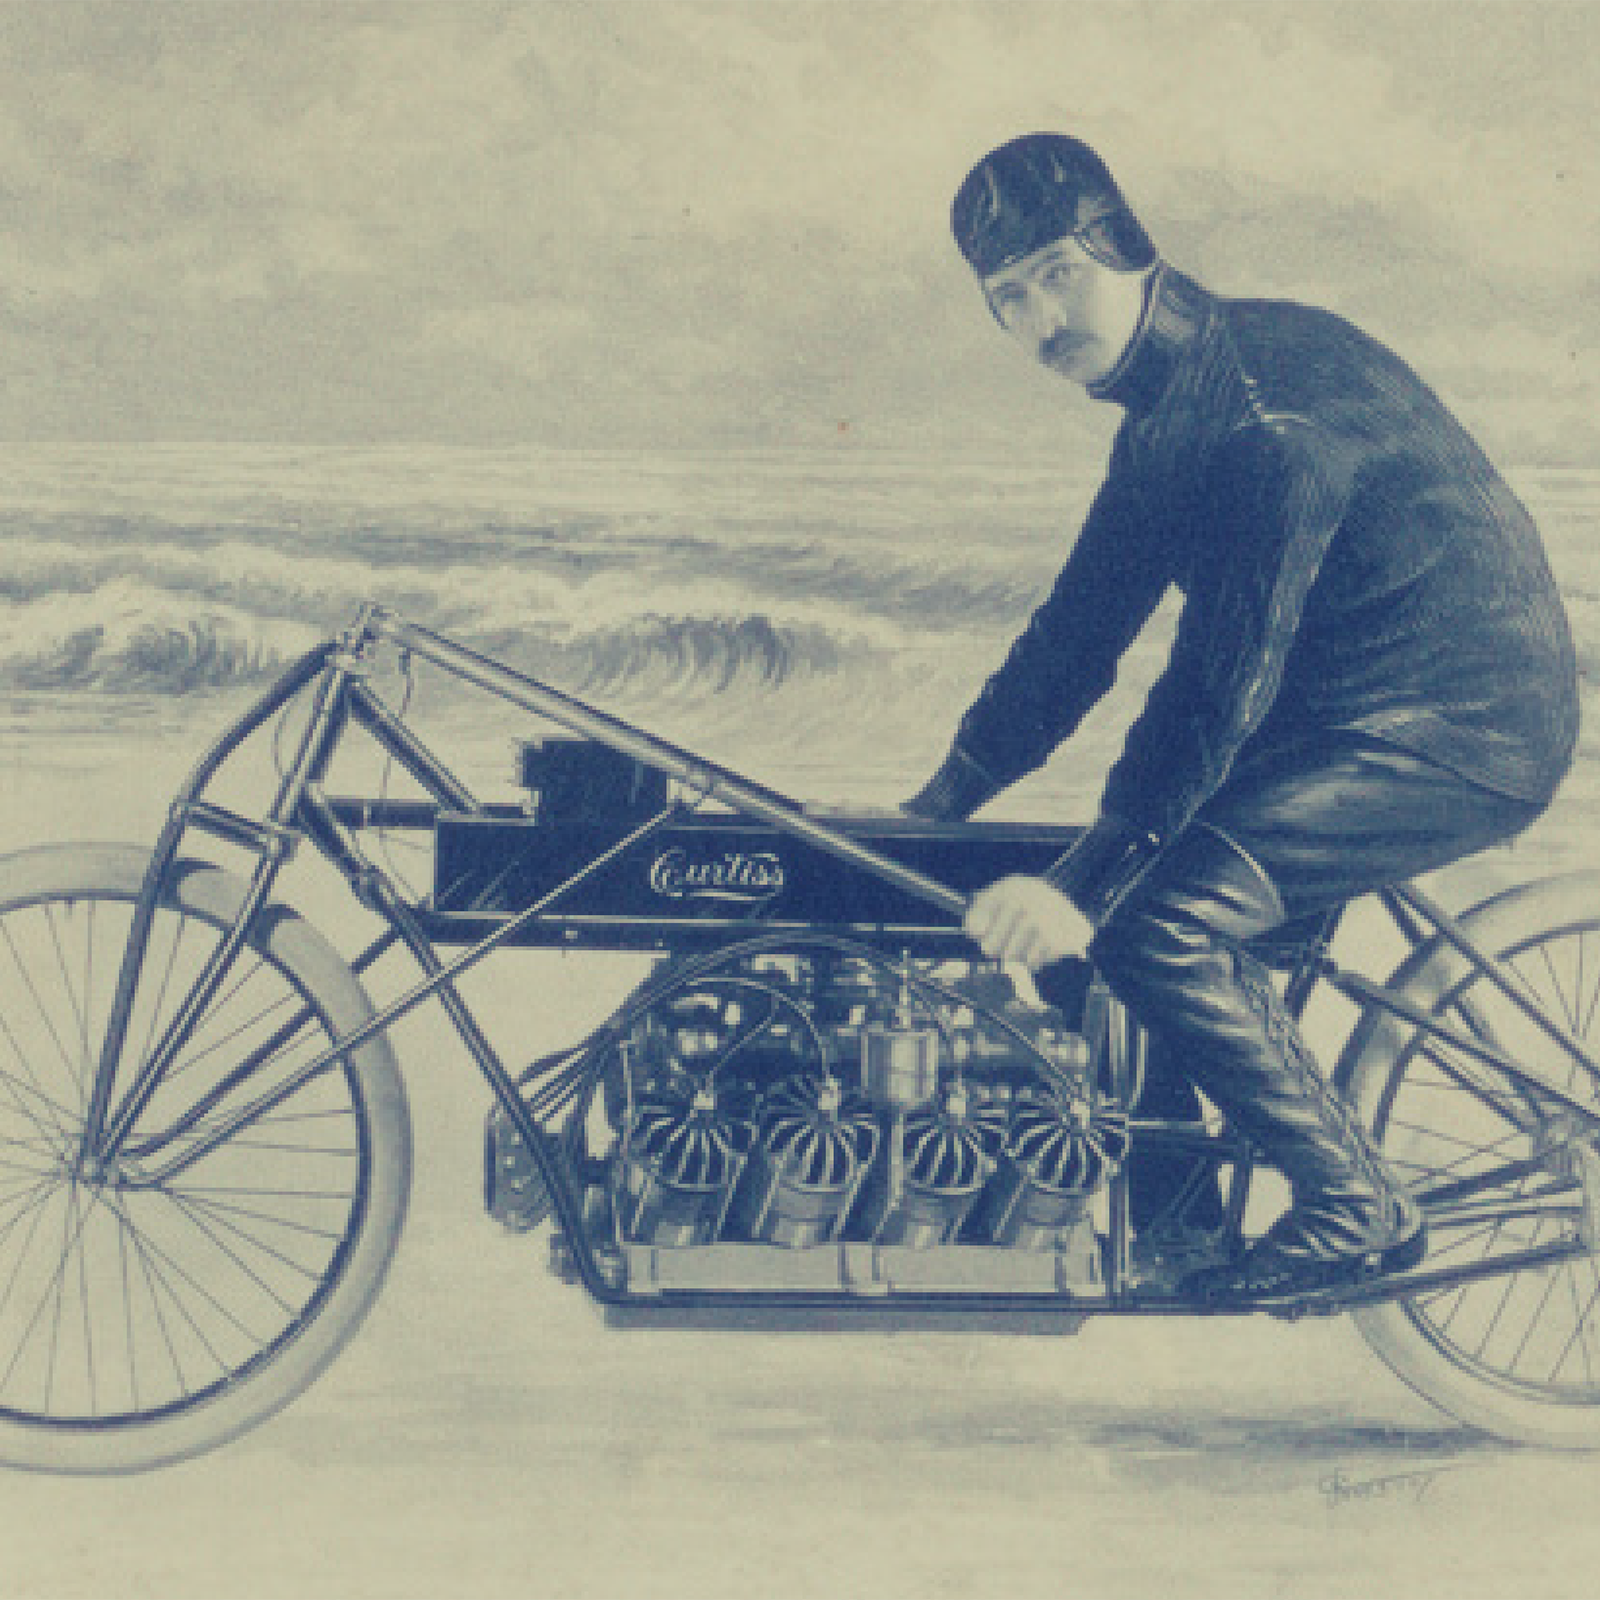 On Jan. 24, 1907, Curtiss became the "fastest man in the world" by setting a land speed record of 136.36 MPH on Ormond Beach, FL on his V-8-powered motorcycle.